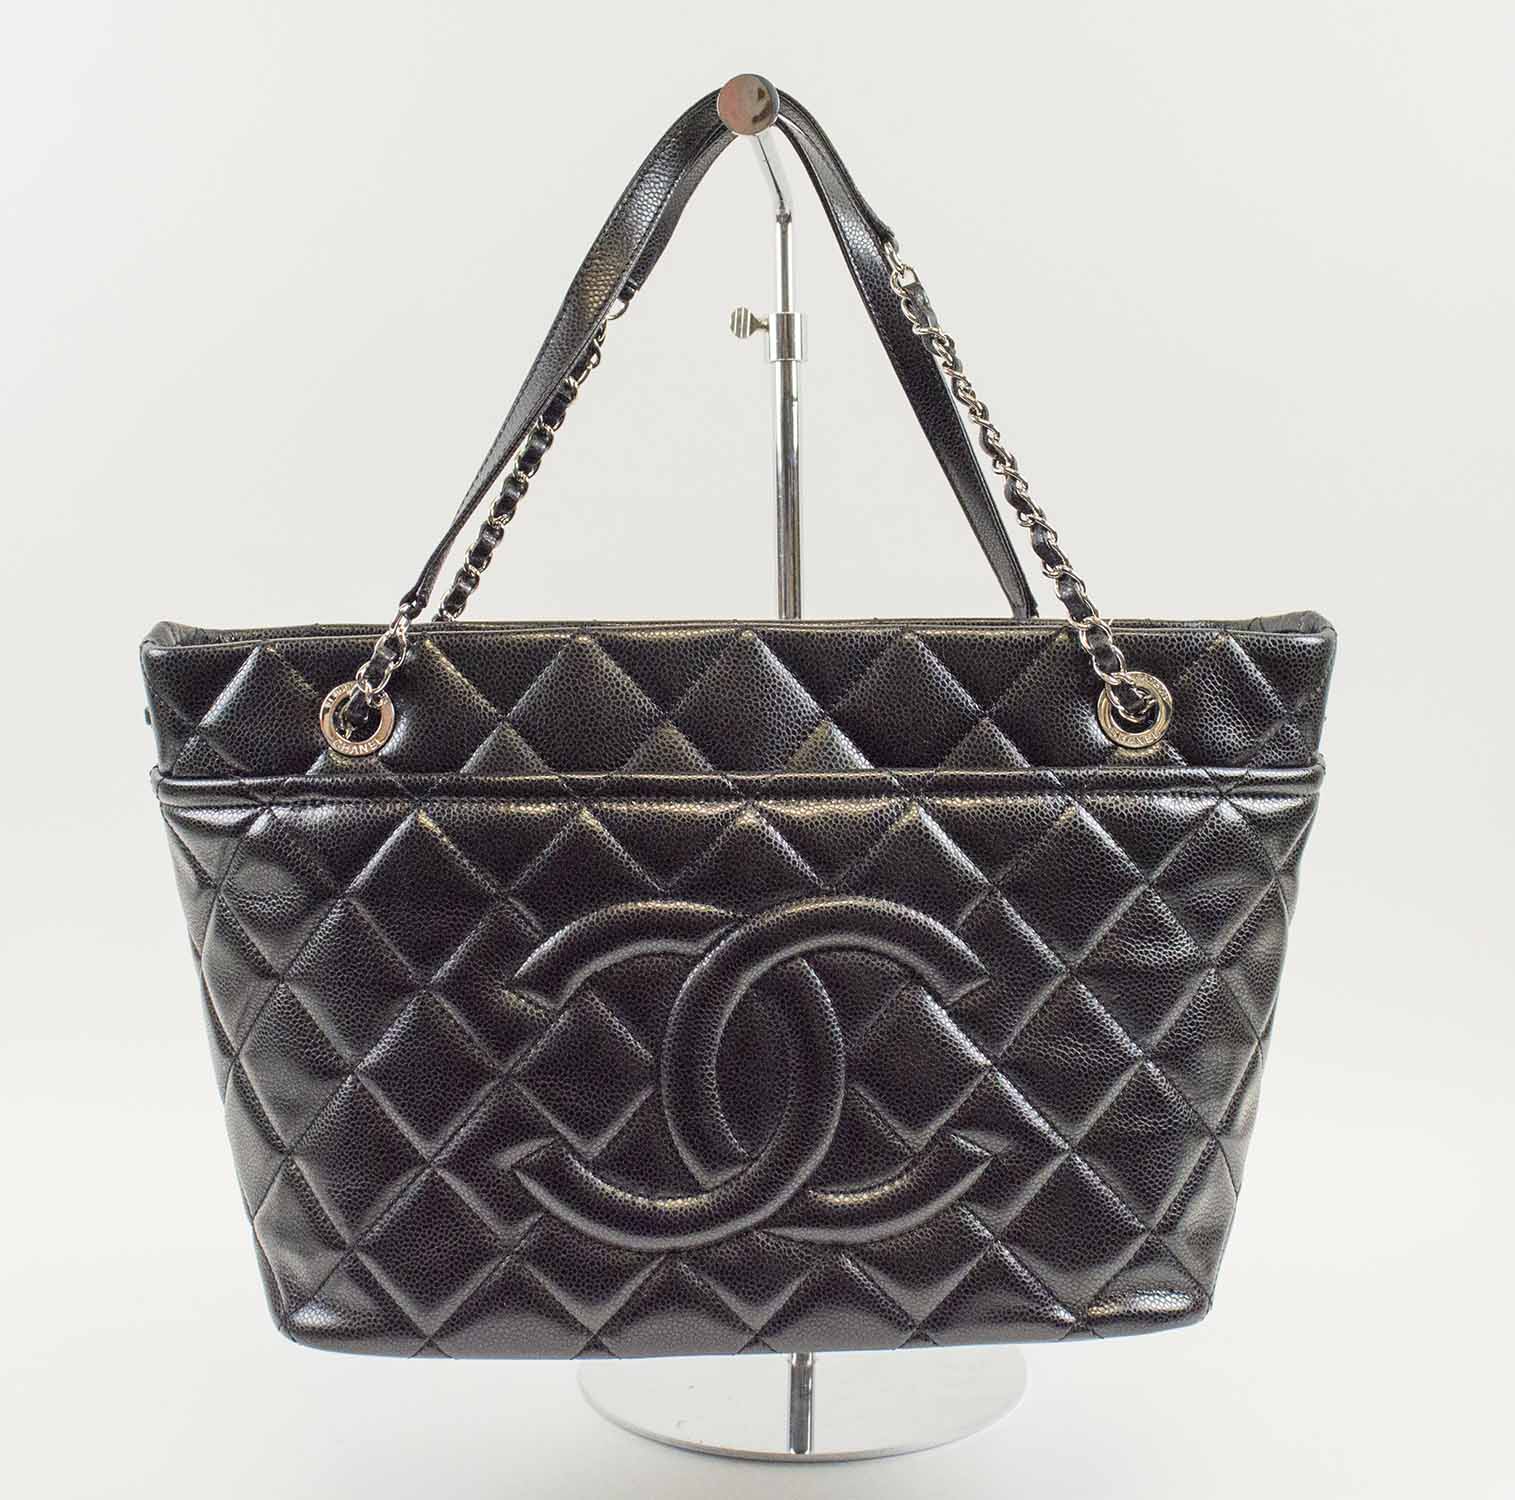 CHANEL SHOPPING TOTE BAG, black quilted grained leather, with